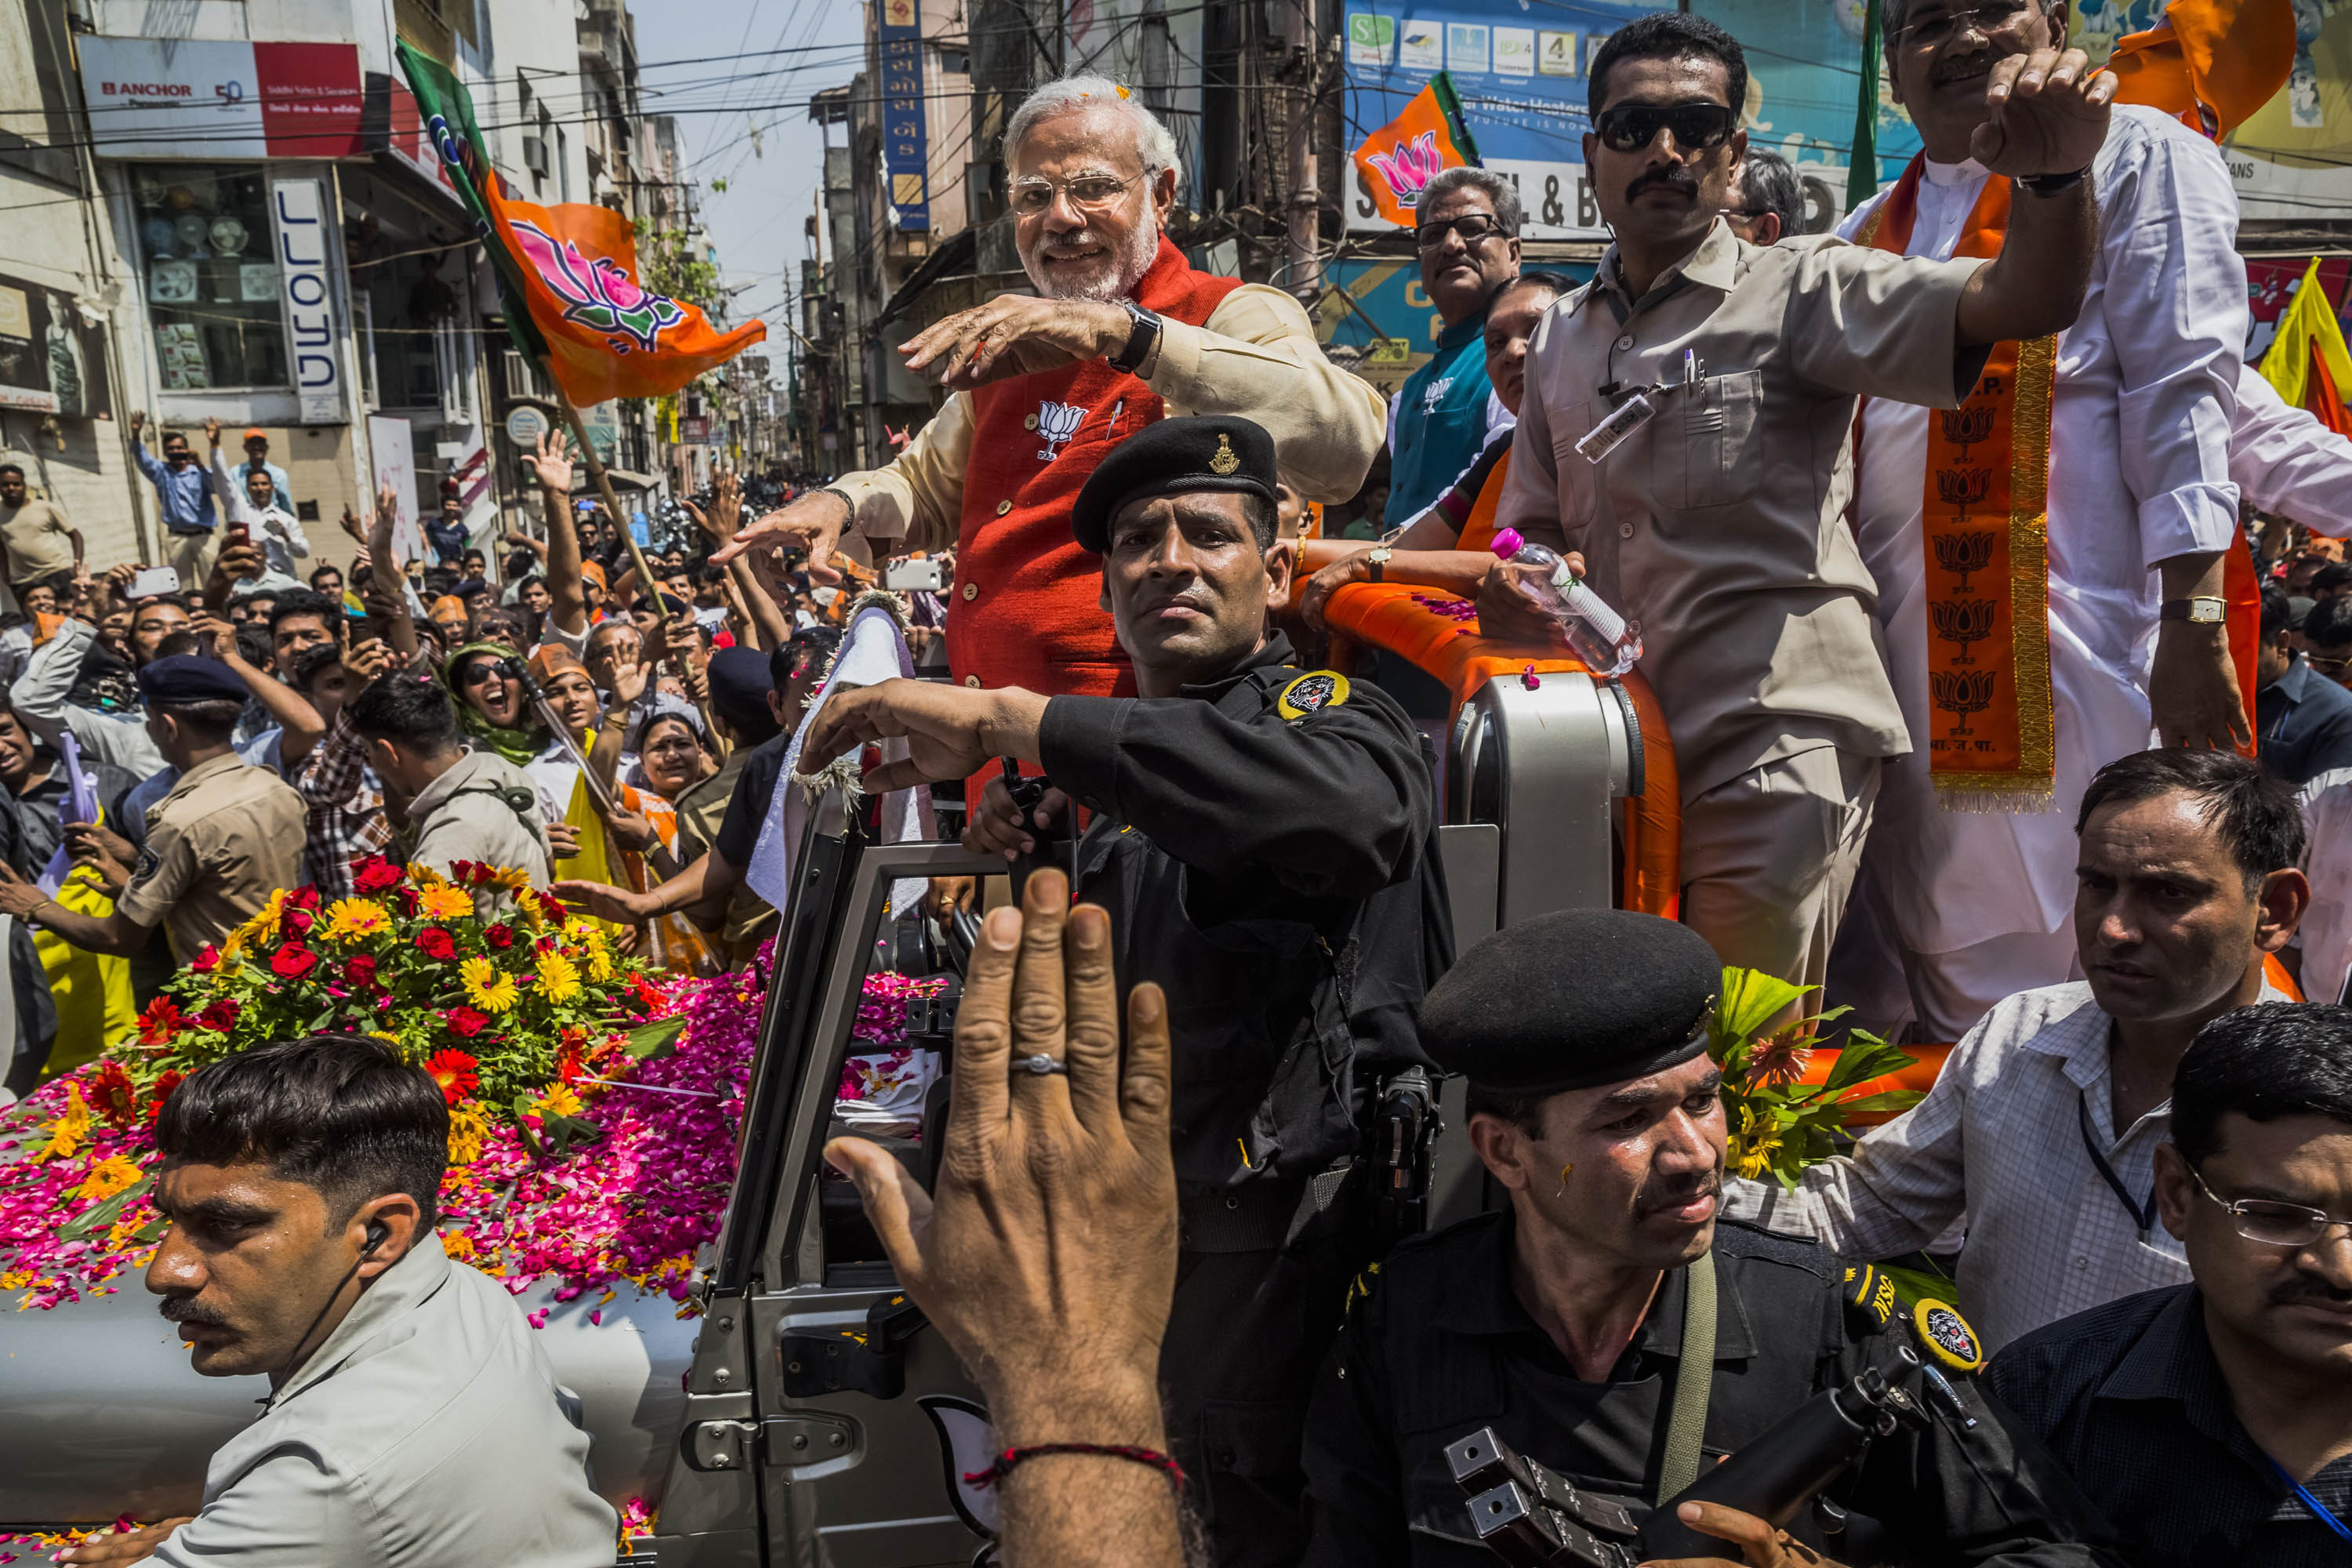 The road to victory, Modi greets supporters at an election rally in Gujarat, where he was chief minister 